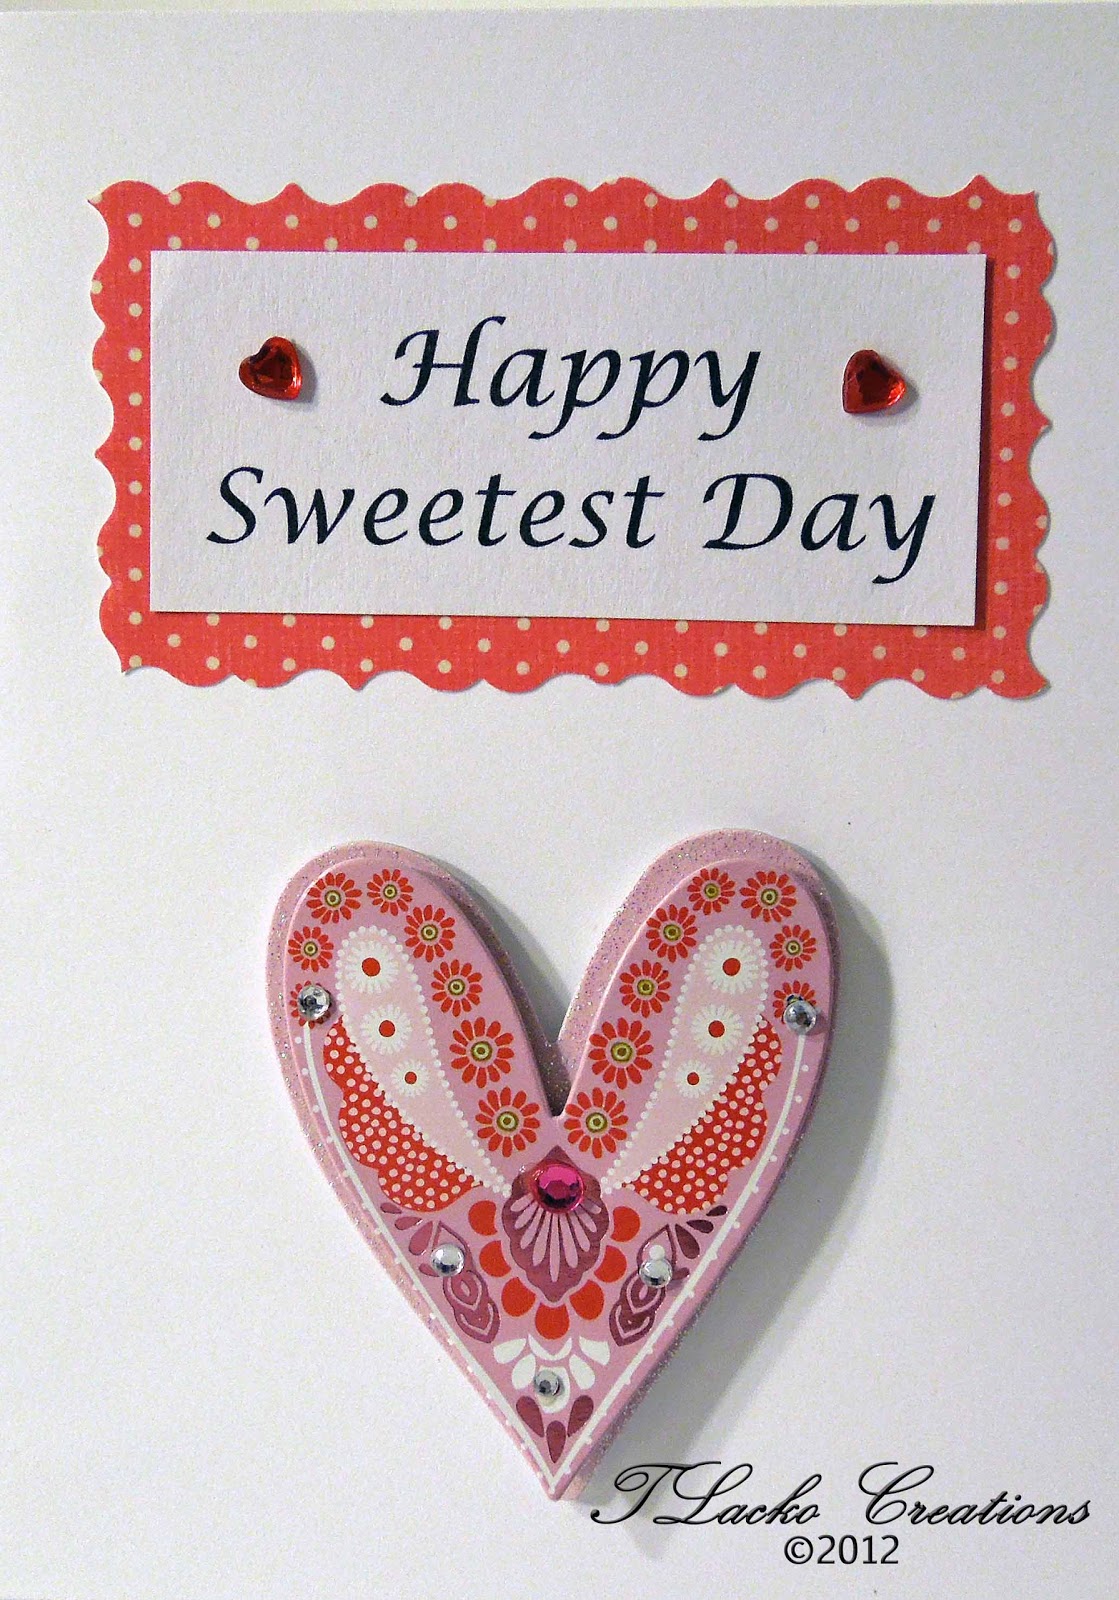 happy-sweetest-day-cards-free-happy-sweetest-day-wishes-greeting